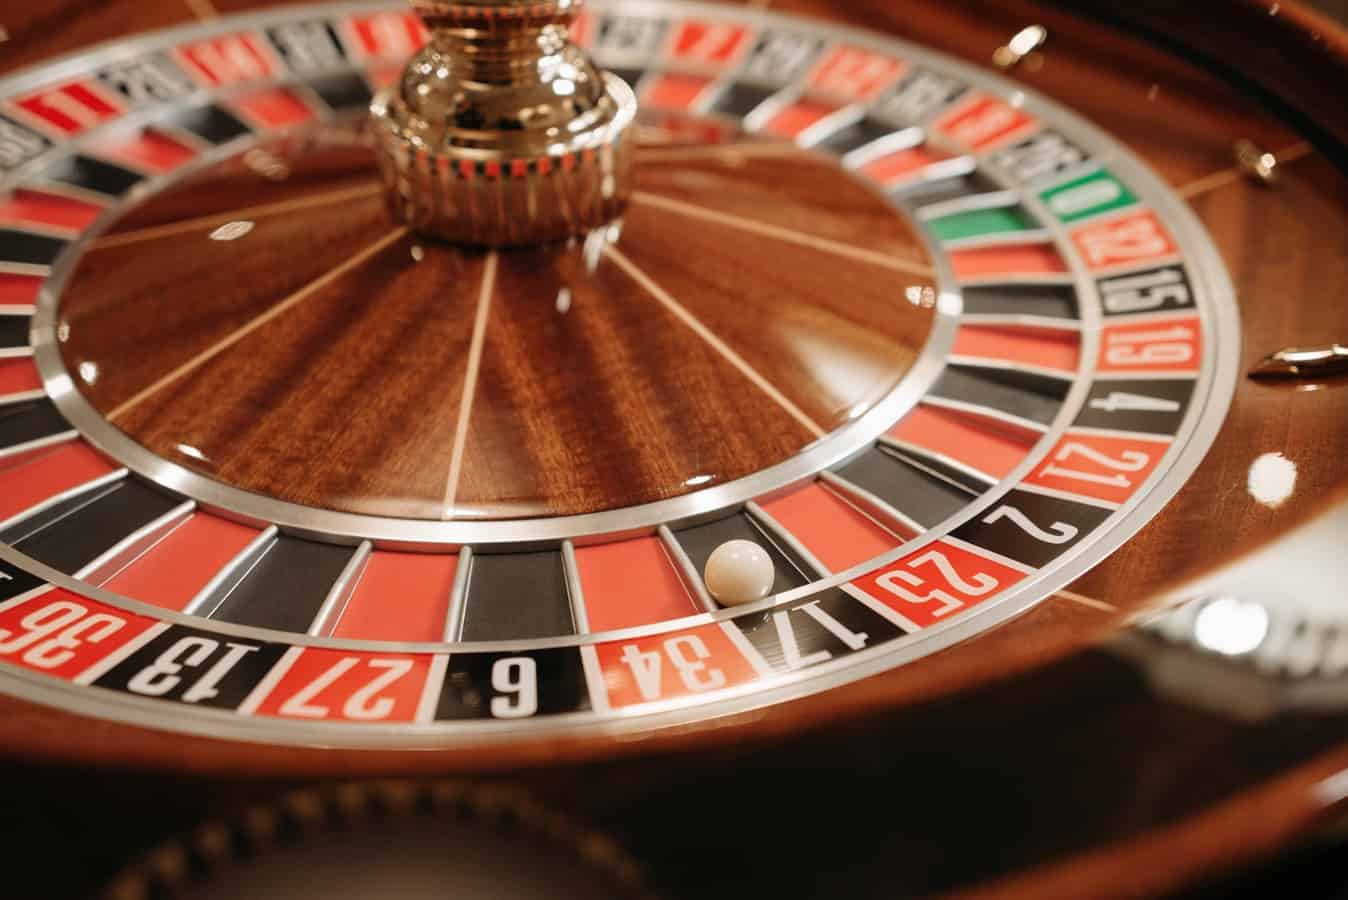 How To Teach best bitcoin slots Better Than Anyone Else